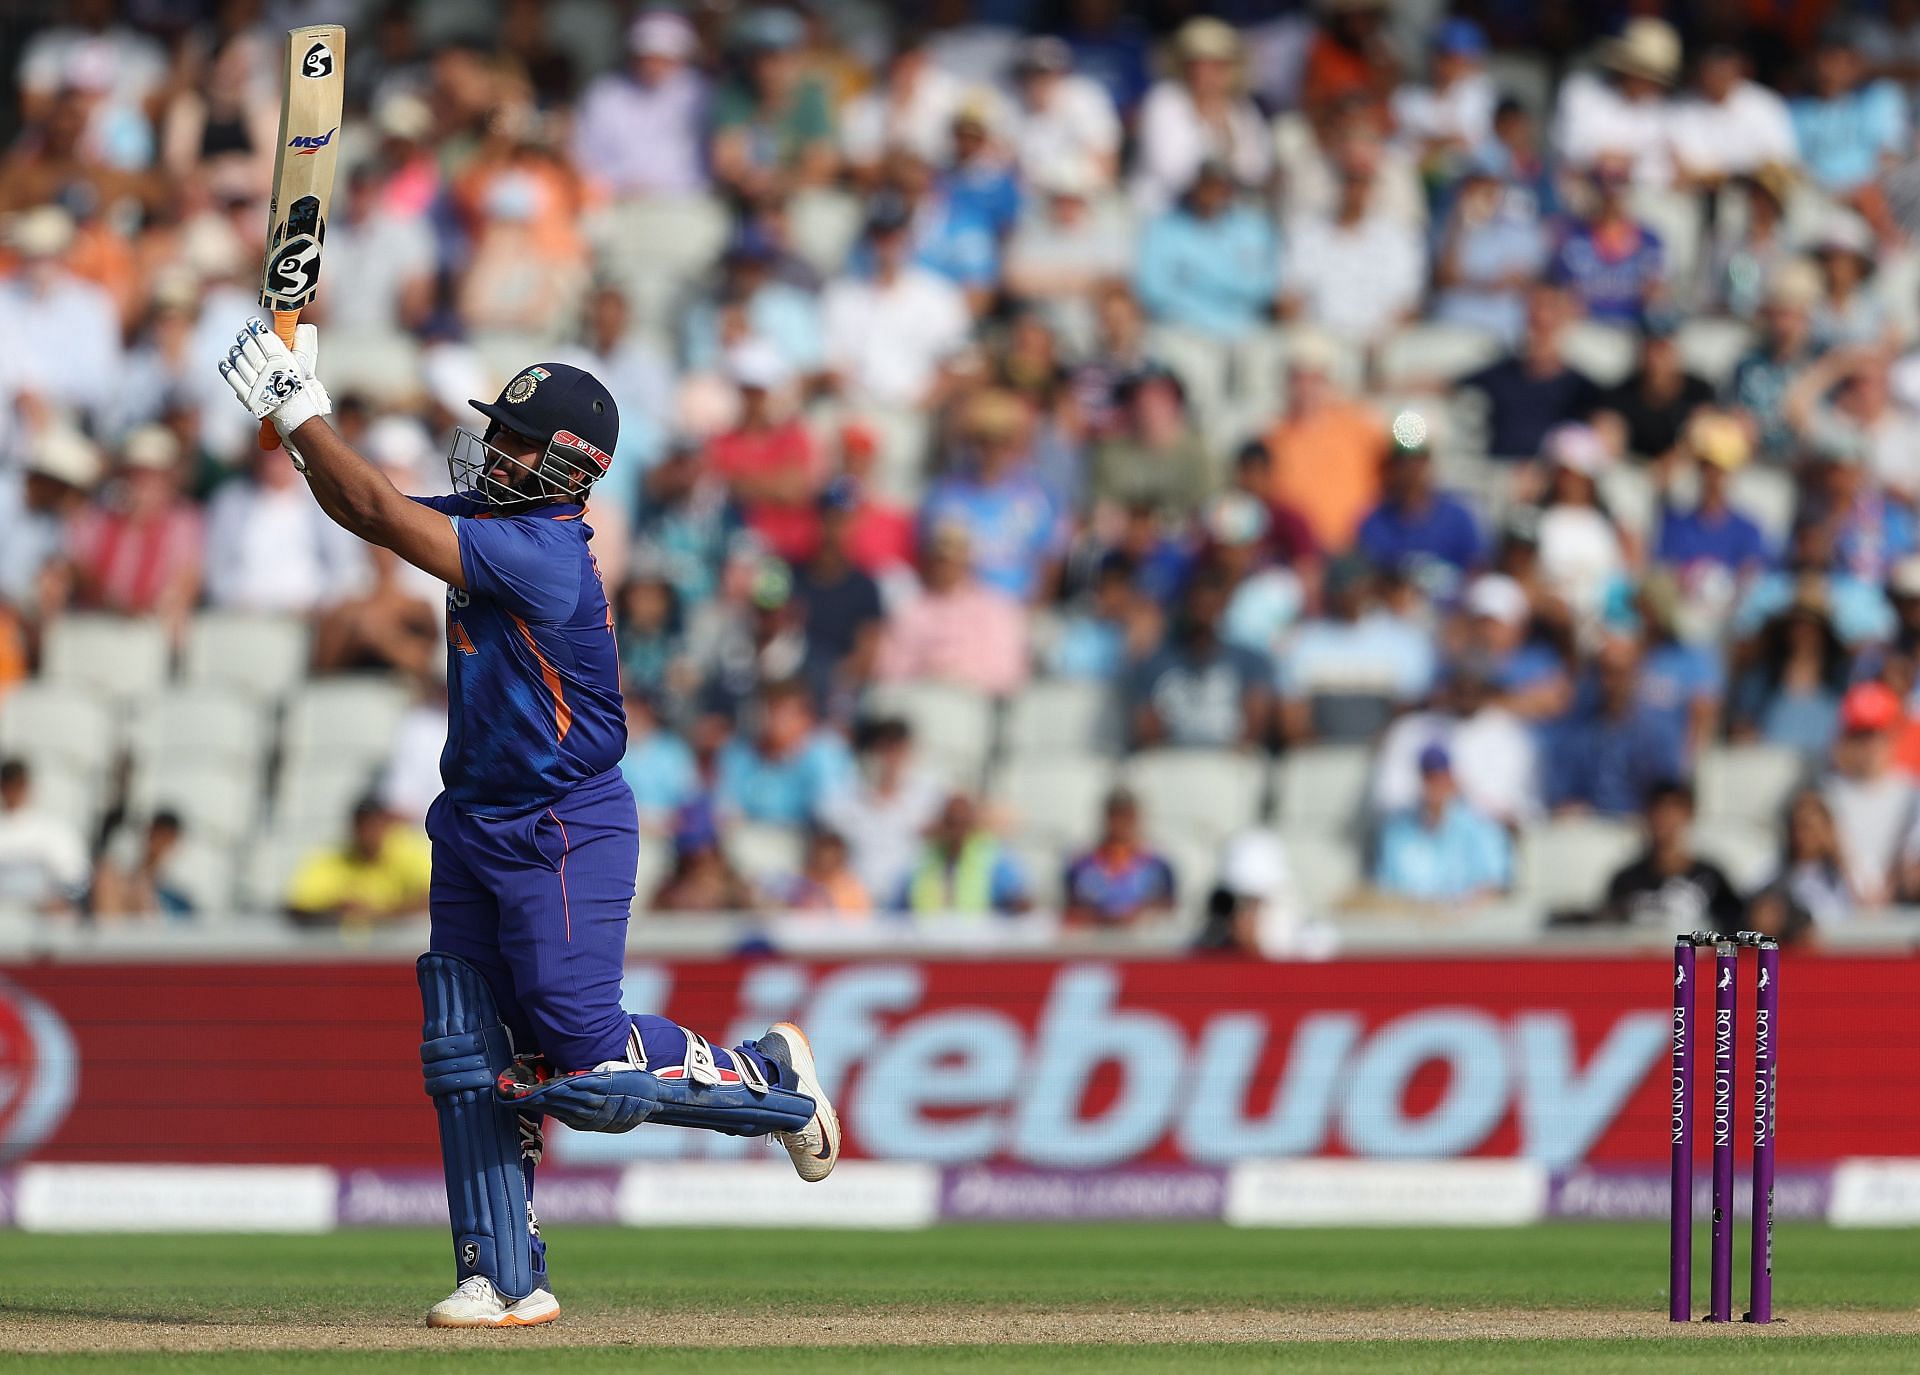 Rishabh Pant remained unbeaten on 125 off 113 balls in 3rd ODI vs England.